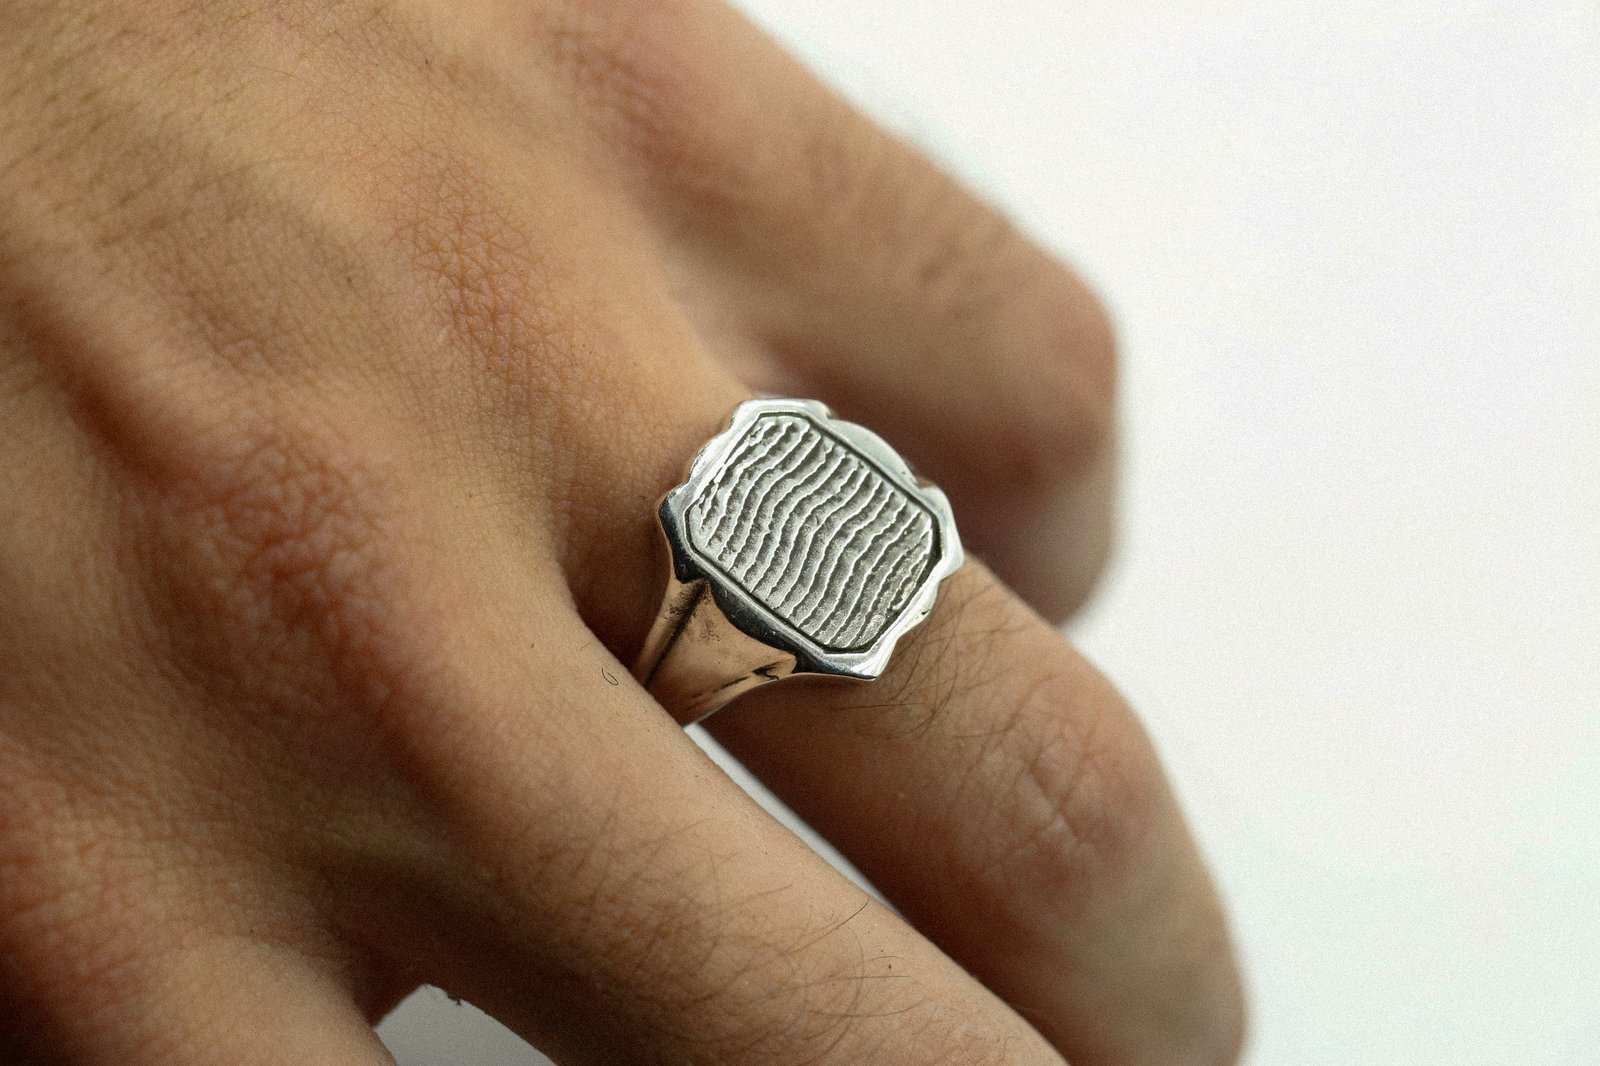 Kaaba Silver Men's Ring-islamic Gifts for Her Kaaba Ring, Islamic Gift for  Him Gift Jewelry Muslim Gift Jewelry Turkish Handmade Gifts - Etsy